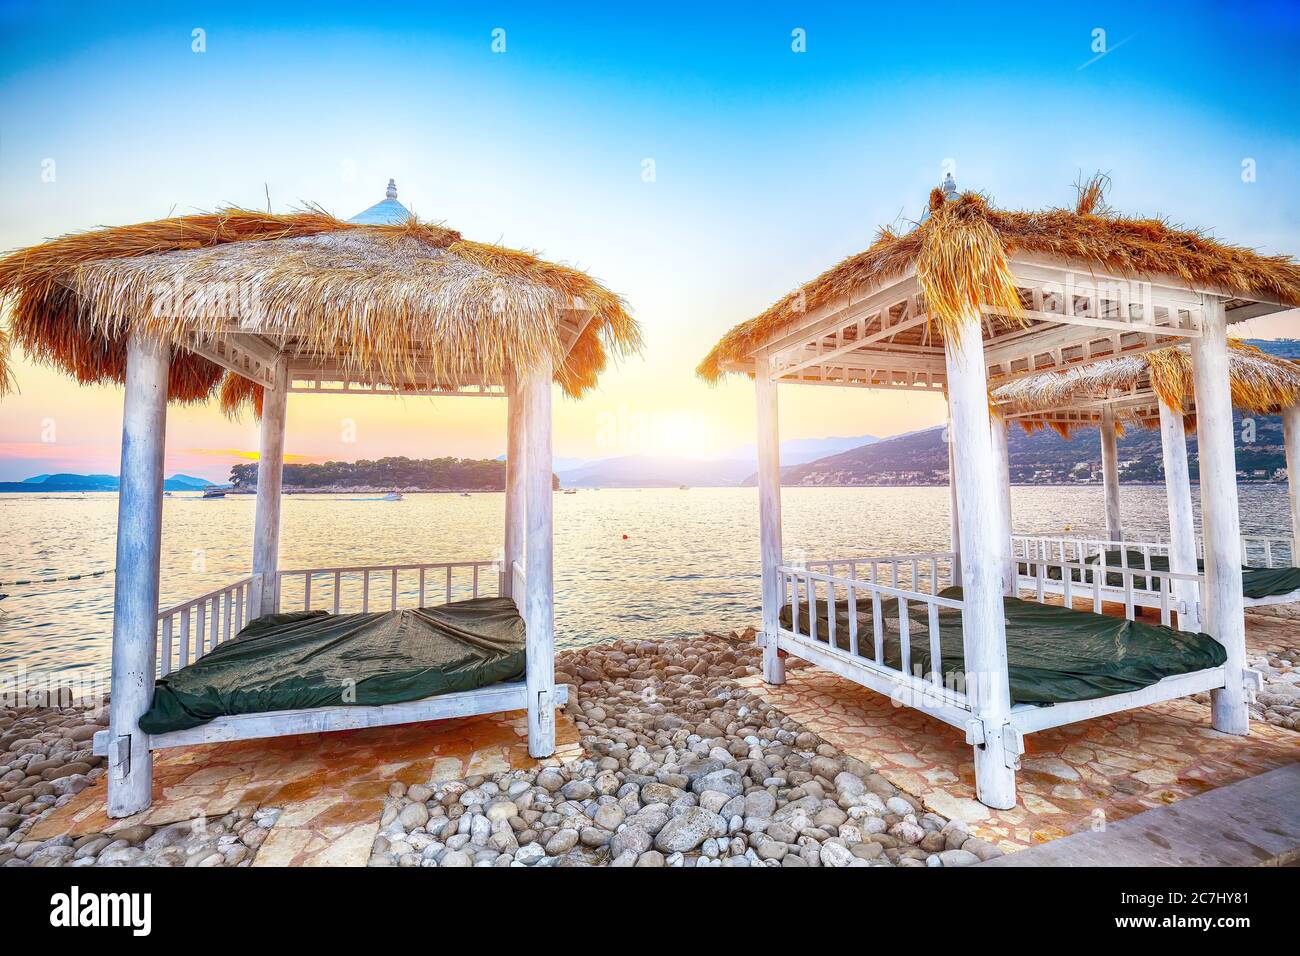 Thatched canopies and awnings on the beach Copacabana at sunset in Dubrovnik. Location:  Dubrovnik, Dalmatia, Croatia, Europe Stock Photo